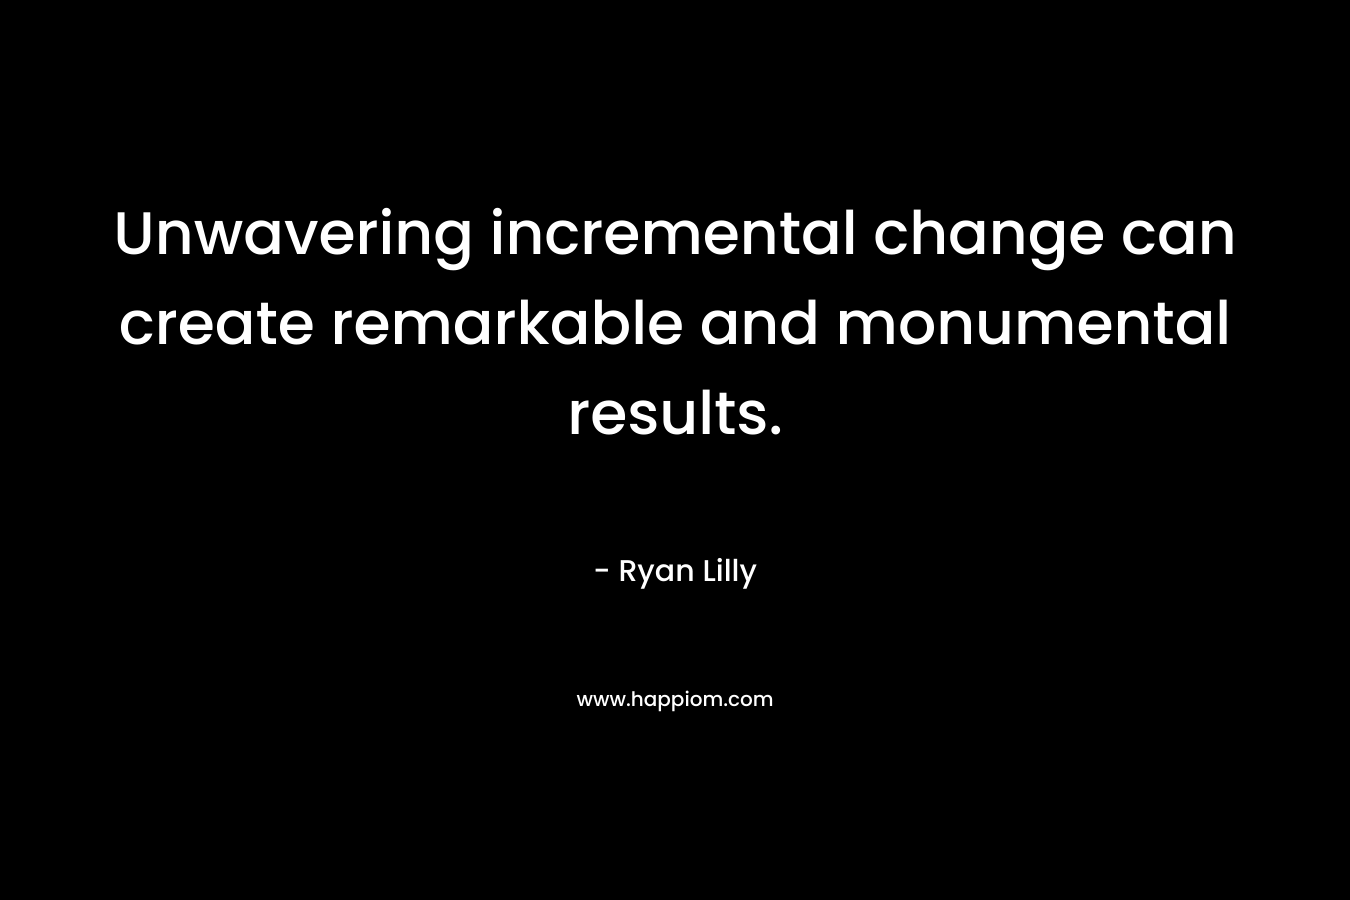 Unwavering incremental change can create remarkable and monumental results. – Ryan Lilly